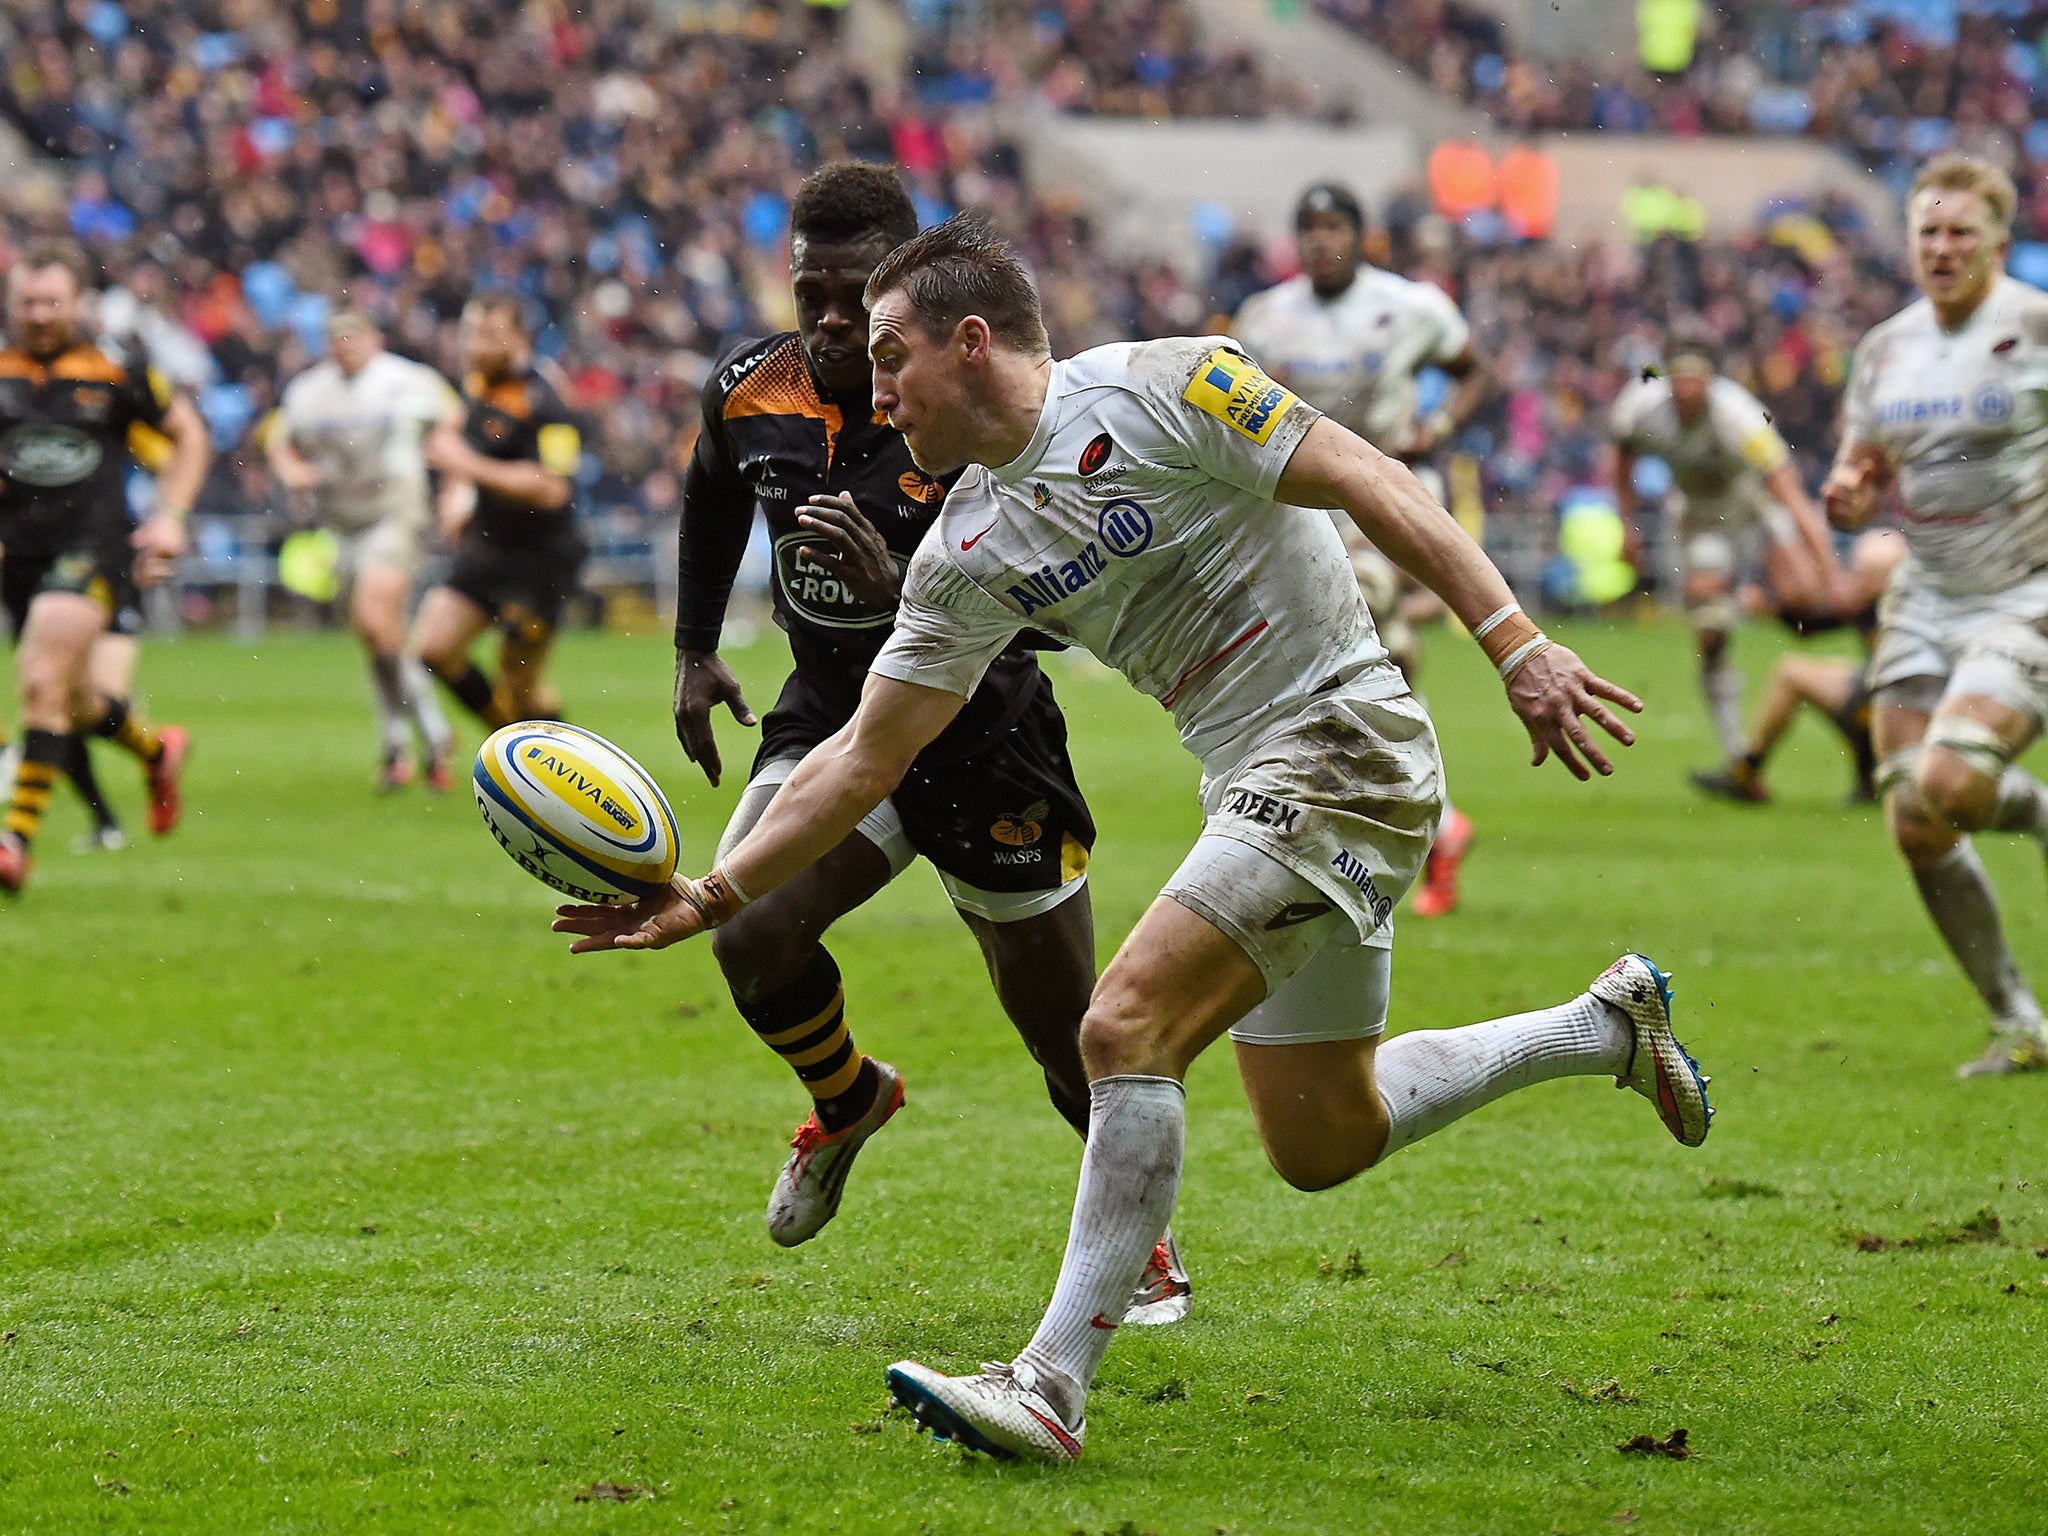 Chris Wyles of Saracens gathers the loose ball ahead of Christian Wade of Wasps en route to scoring his team's second try